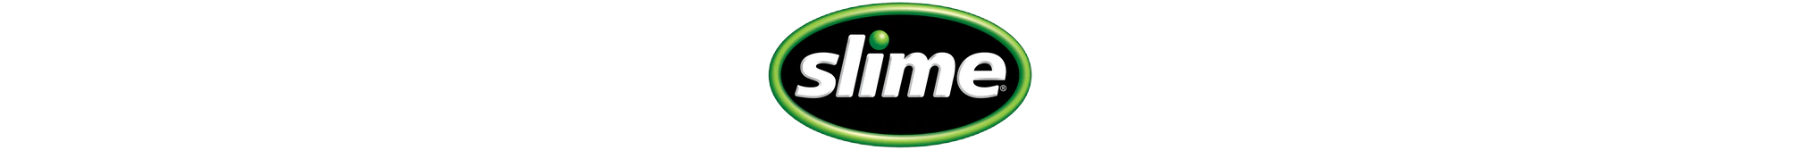 Slime Gilford Hardware & Outdoor Power equipment